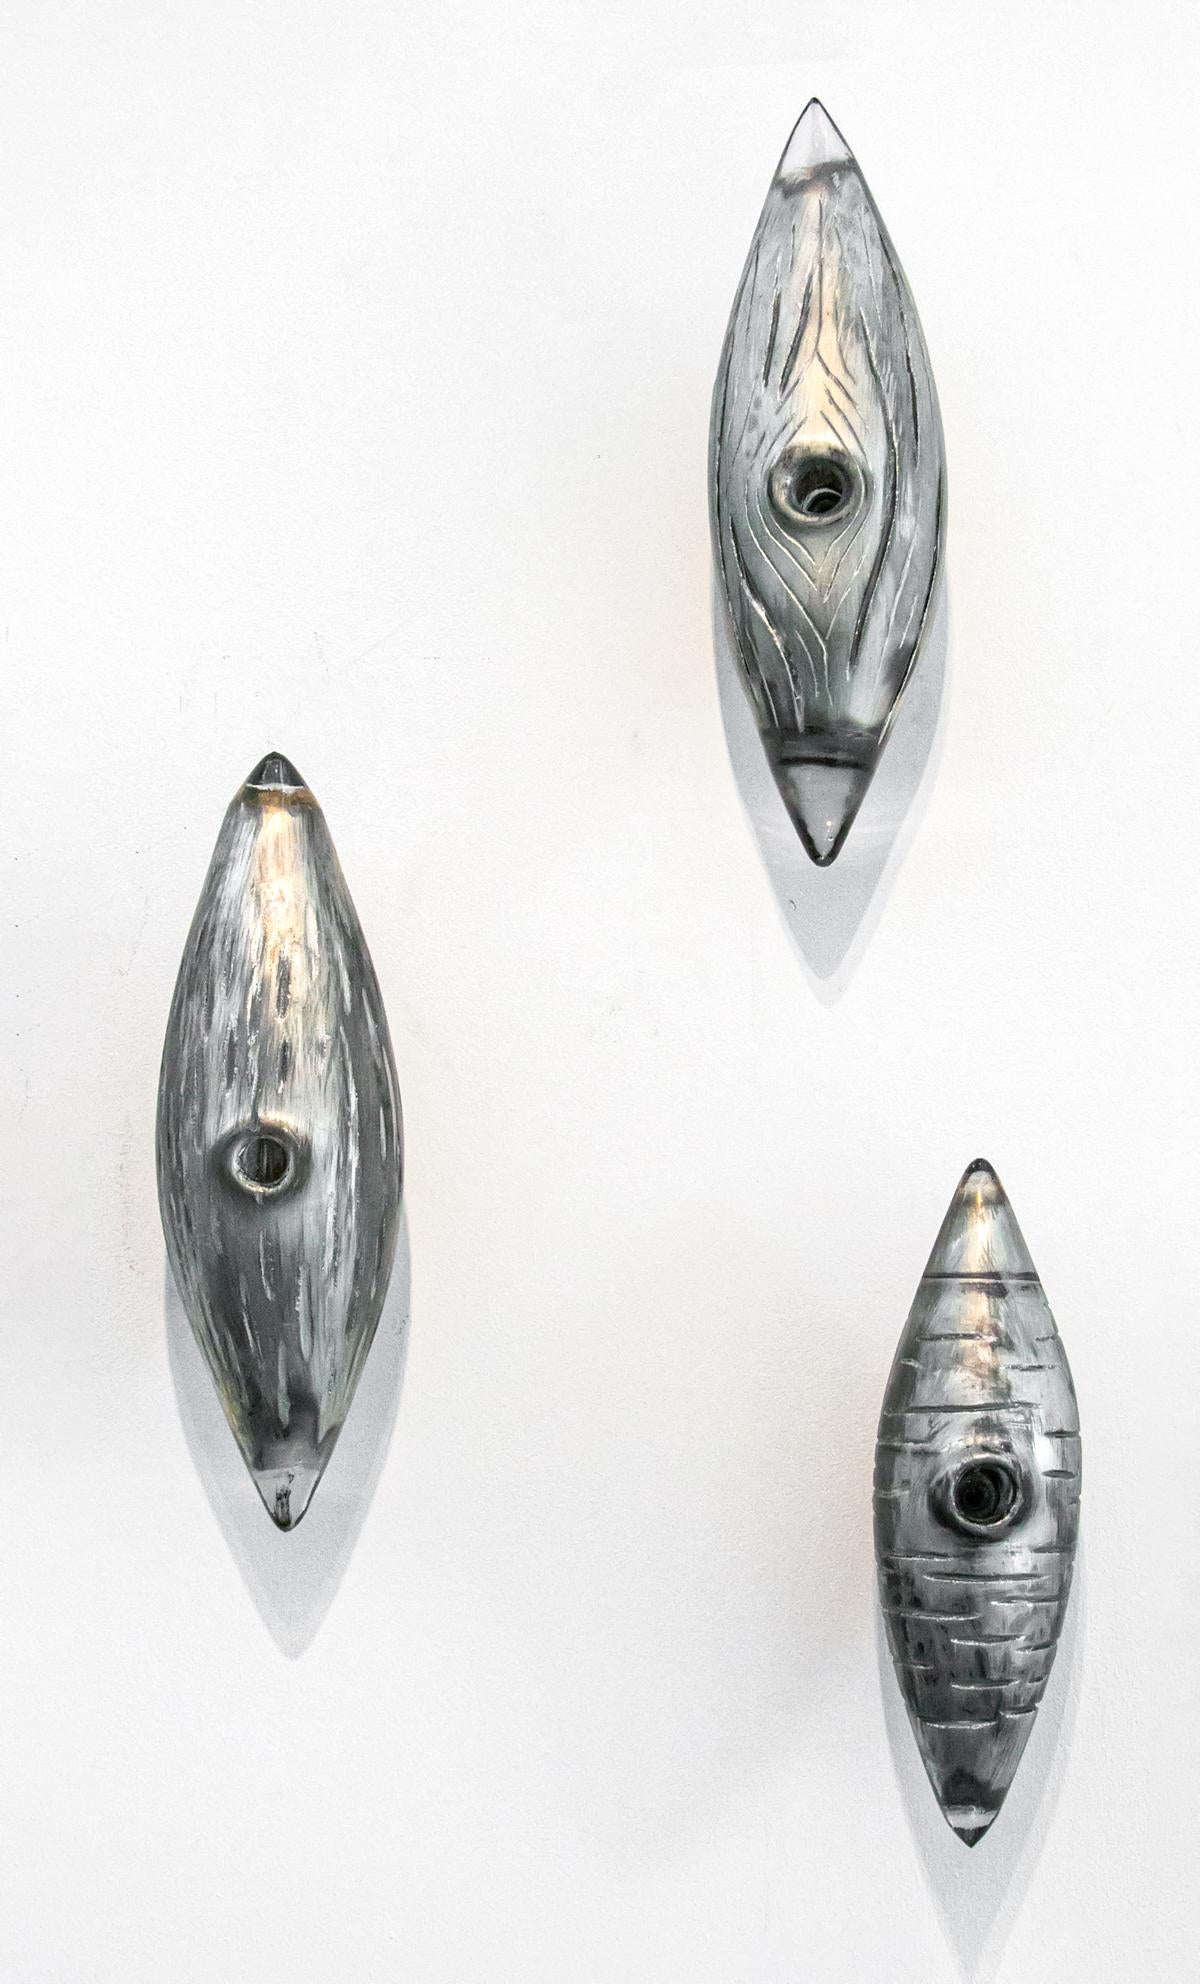 Cocoon Series Silver Woodgrain Grouping - silver painted glass wall sculpture - Sculpture by Julia Reimer